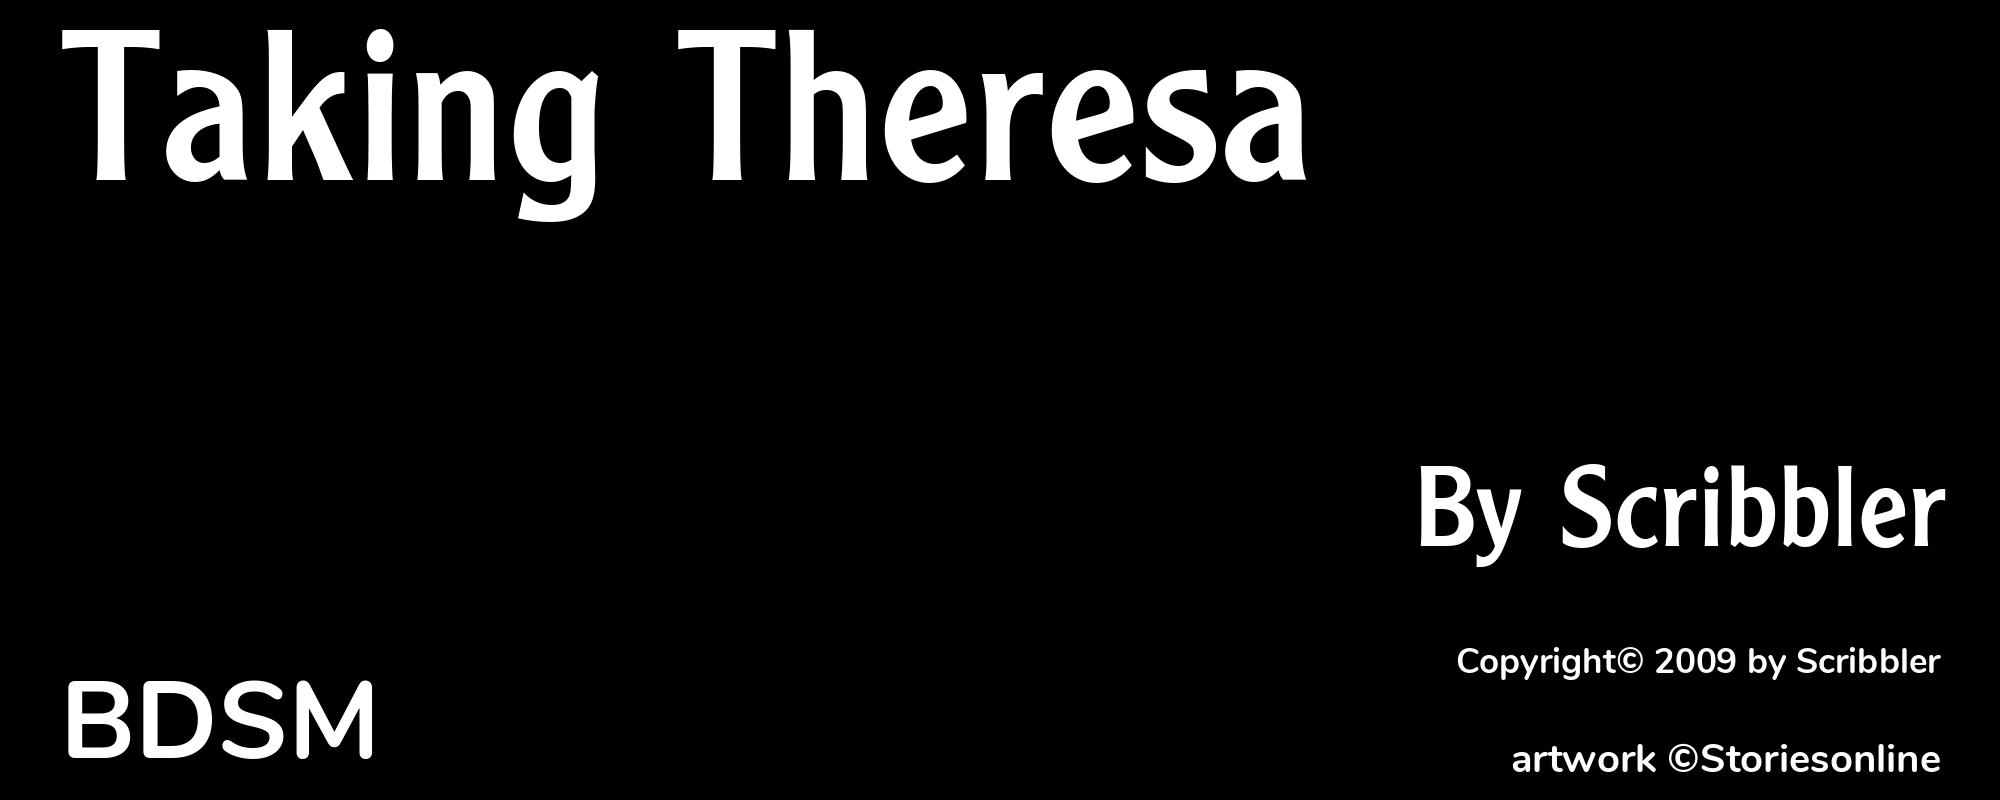 Taking Theresa - Cover